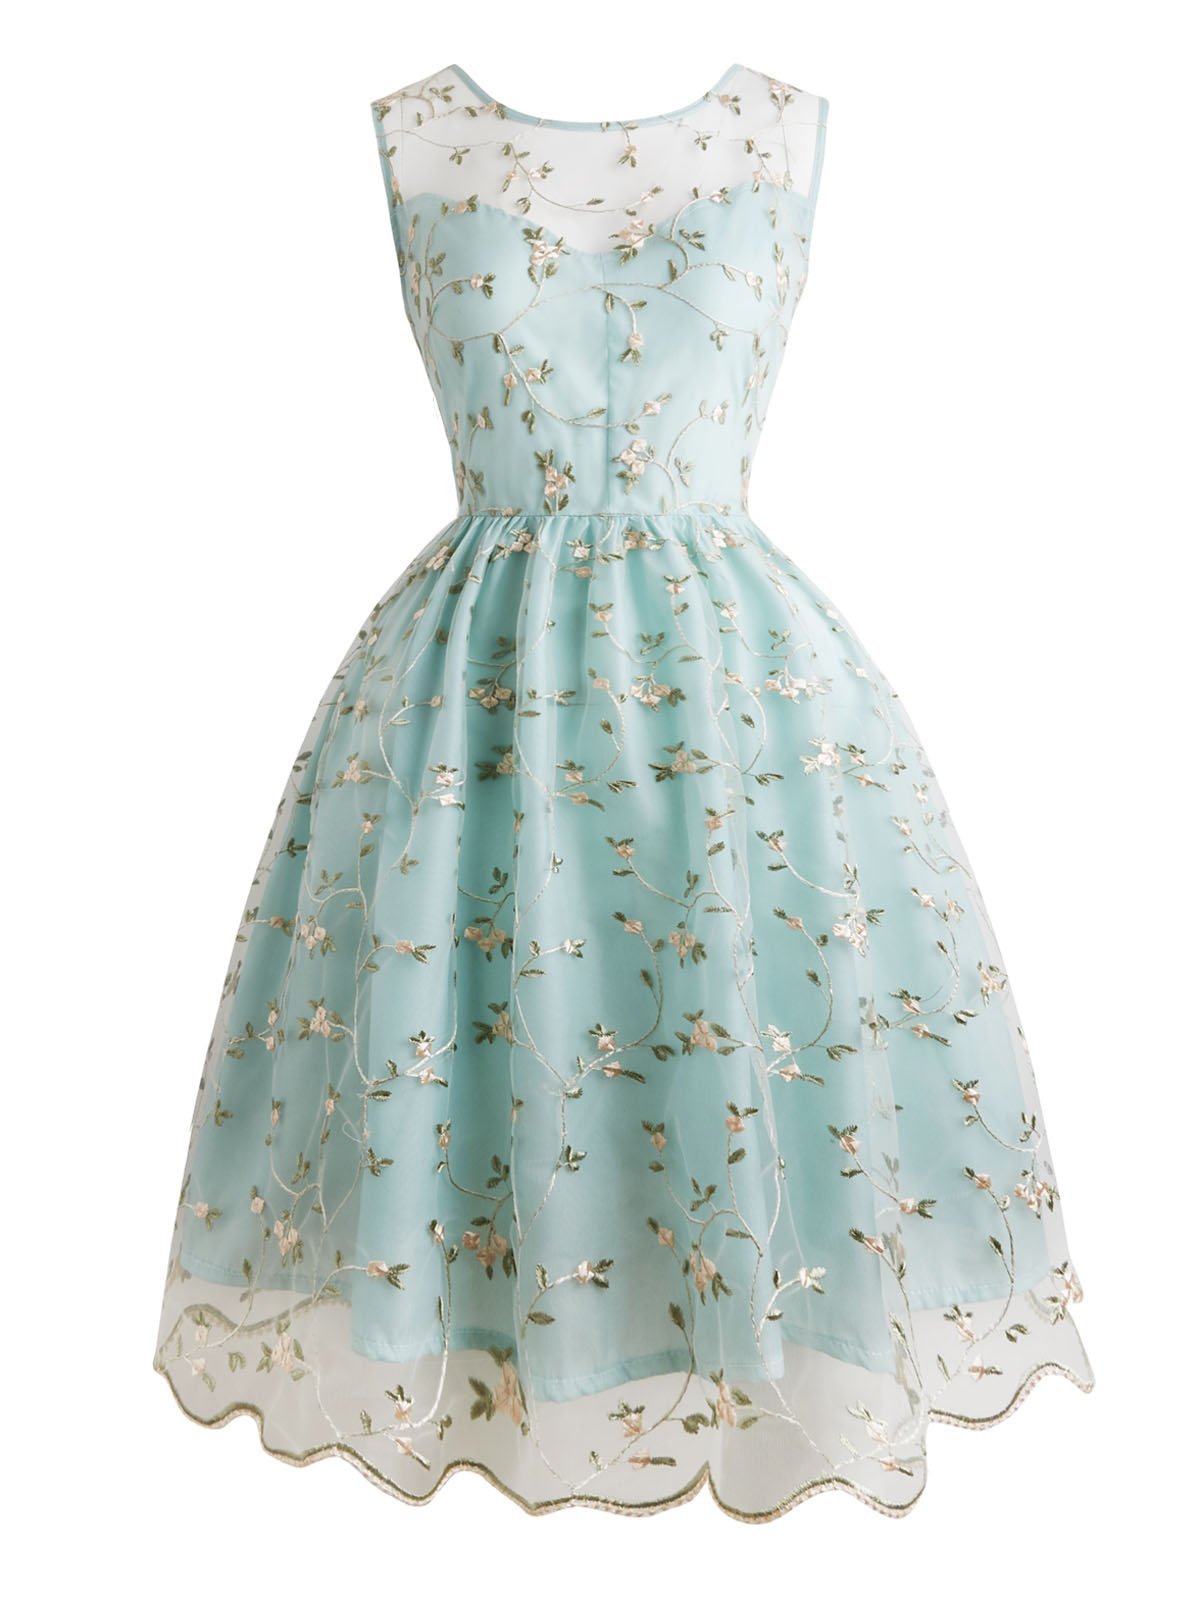 1950s Floral Embroidery Lace Dress